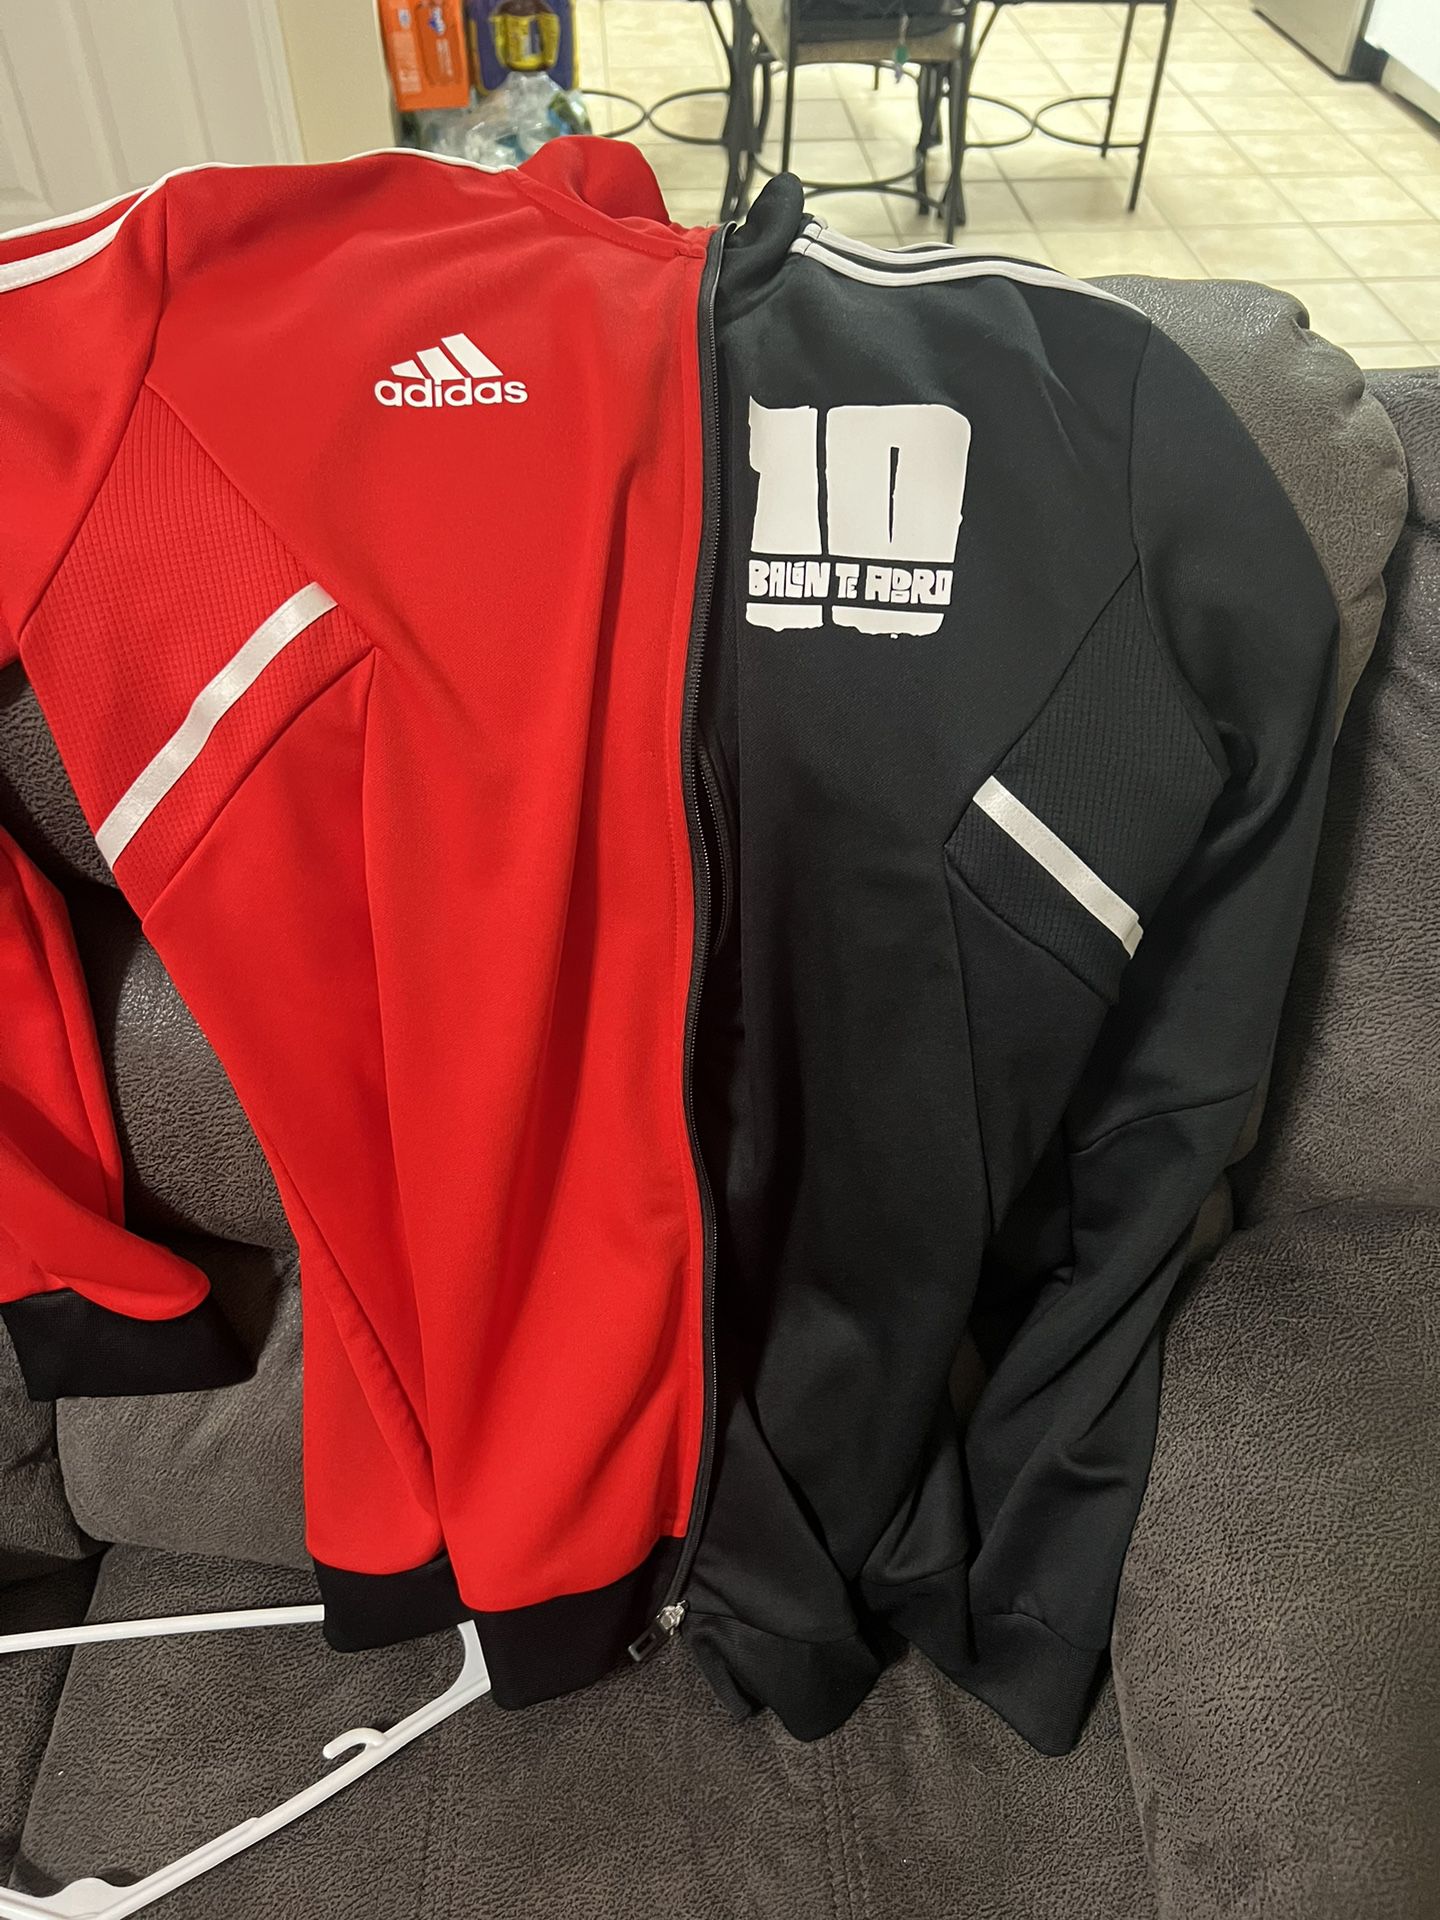 Adidas Tracksuit Only Wore Once